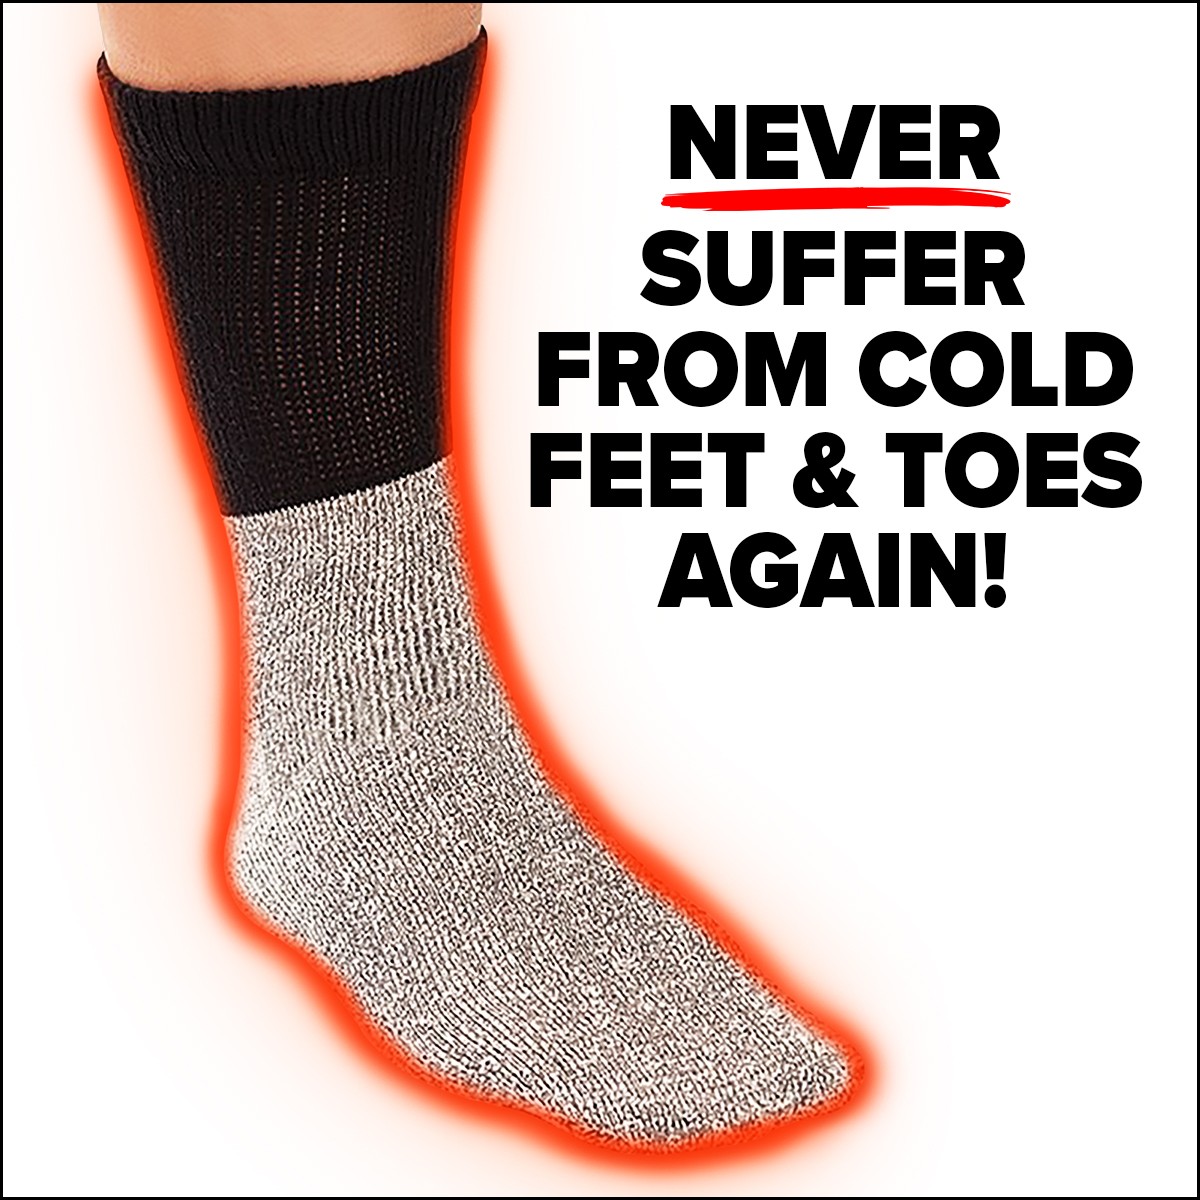 Stay warm with these socks